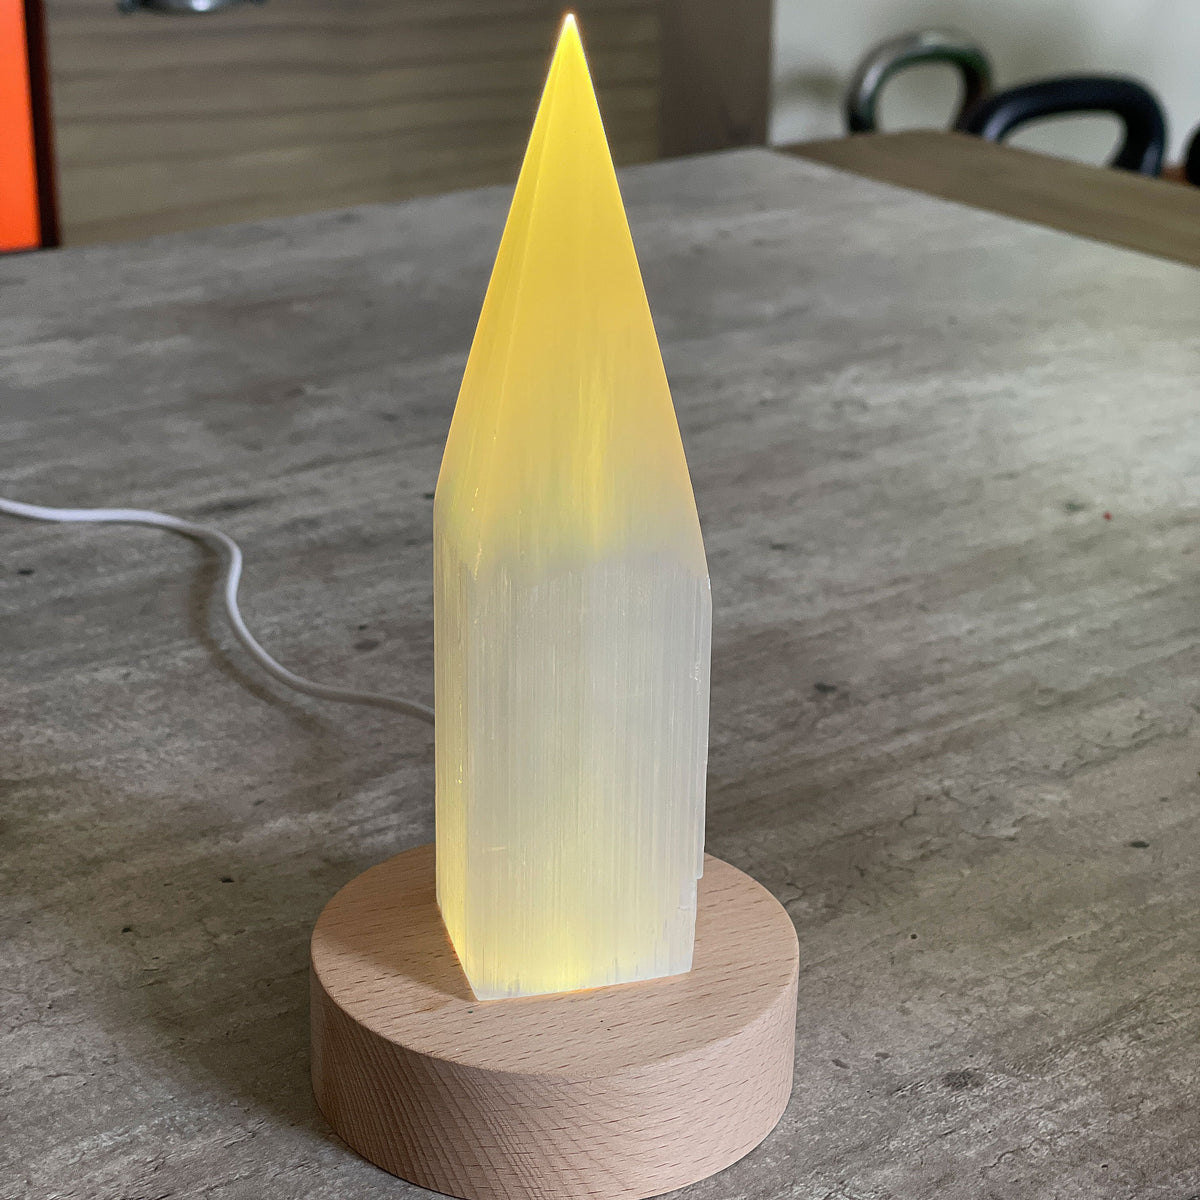 Selenite Lamp - Pencil Point Large - Selenite is a beautiful and versatile crystal that offers numerous benefits, making it a popular choice for both decor and holistic purposes. Its natural beauty and unique translucent appearance make it an eye-catching addition to any home. Selenite emits a soft and warm glow, which makes it an excellent choice for a night light.